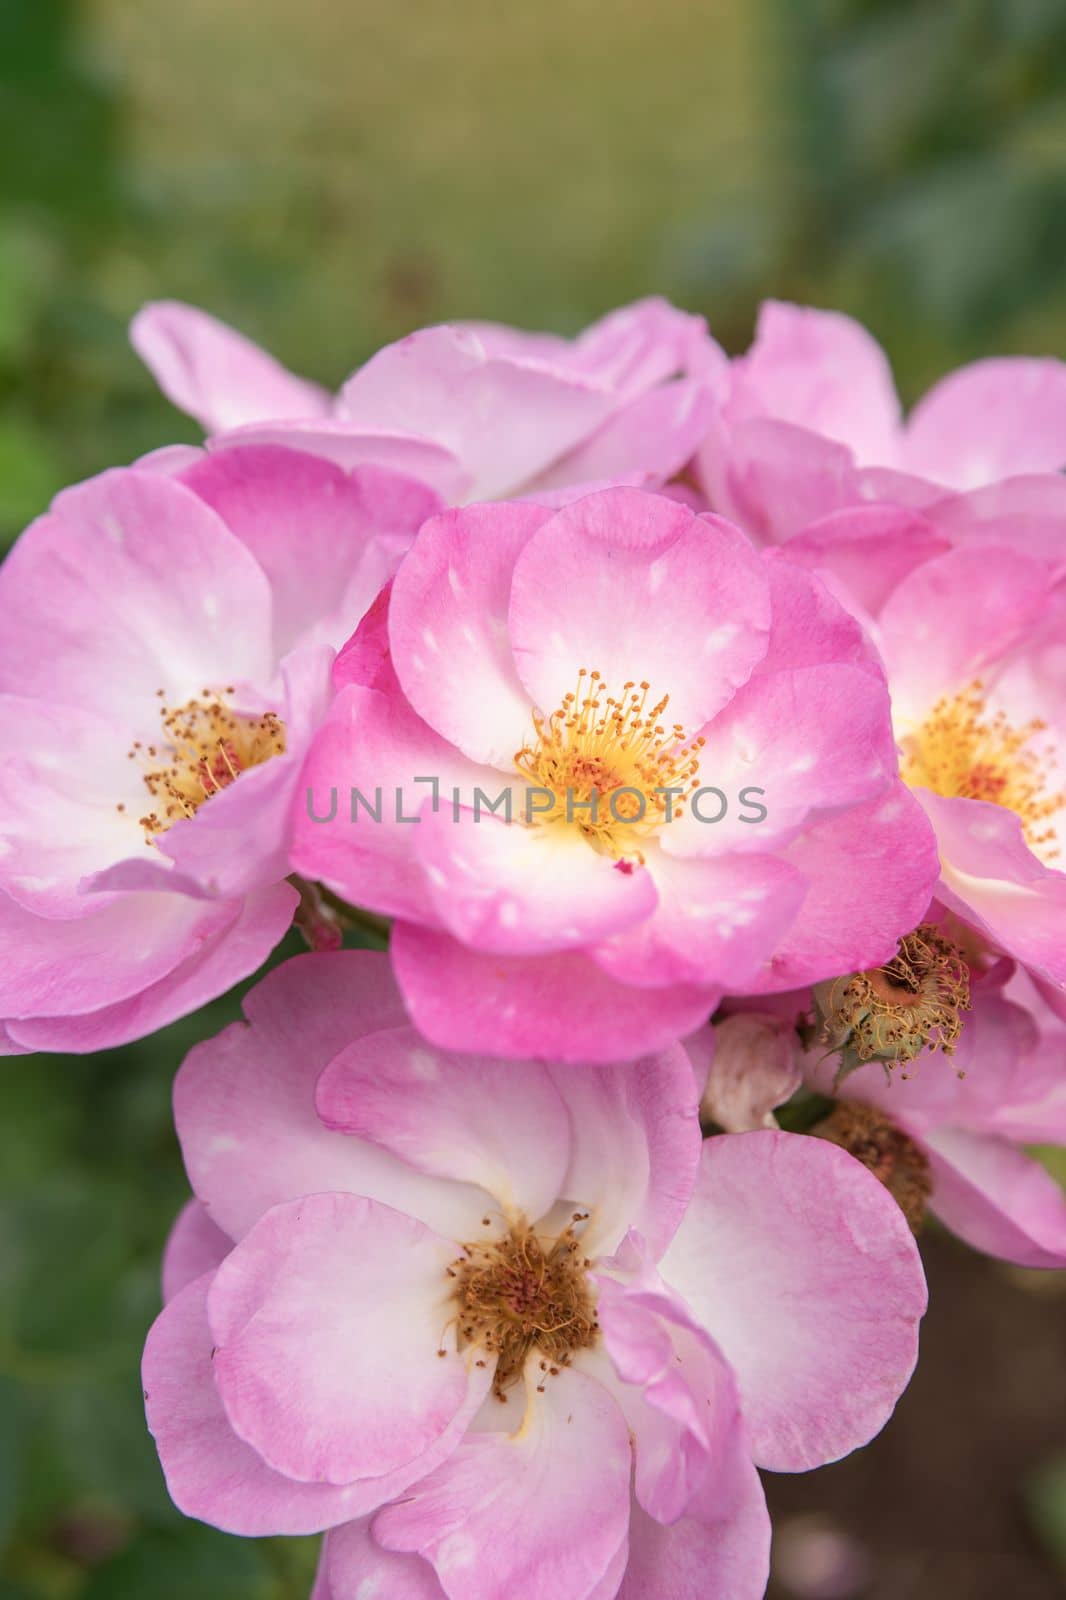 harkness rosa. Rose with small pink flat flowers with glow from the sunset.